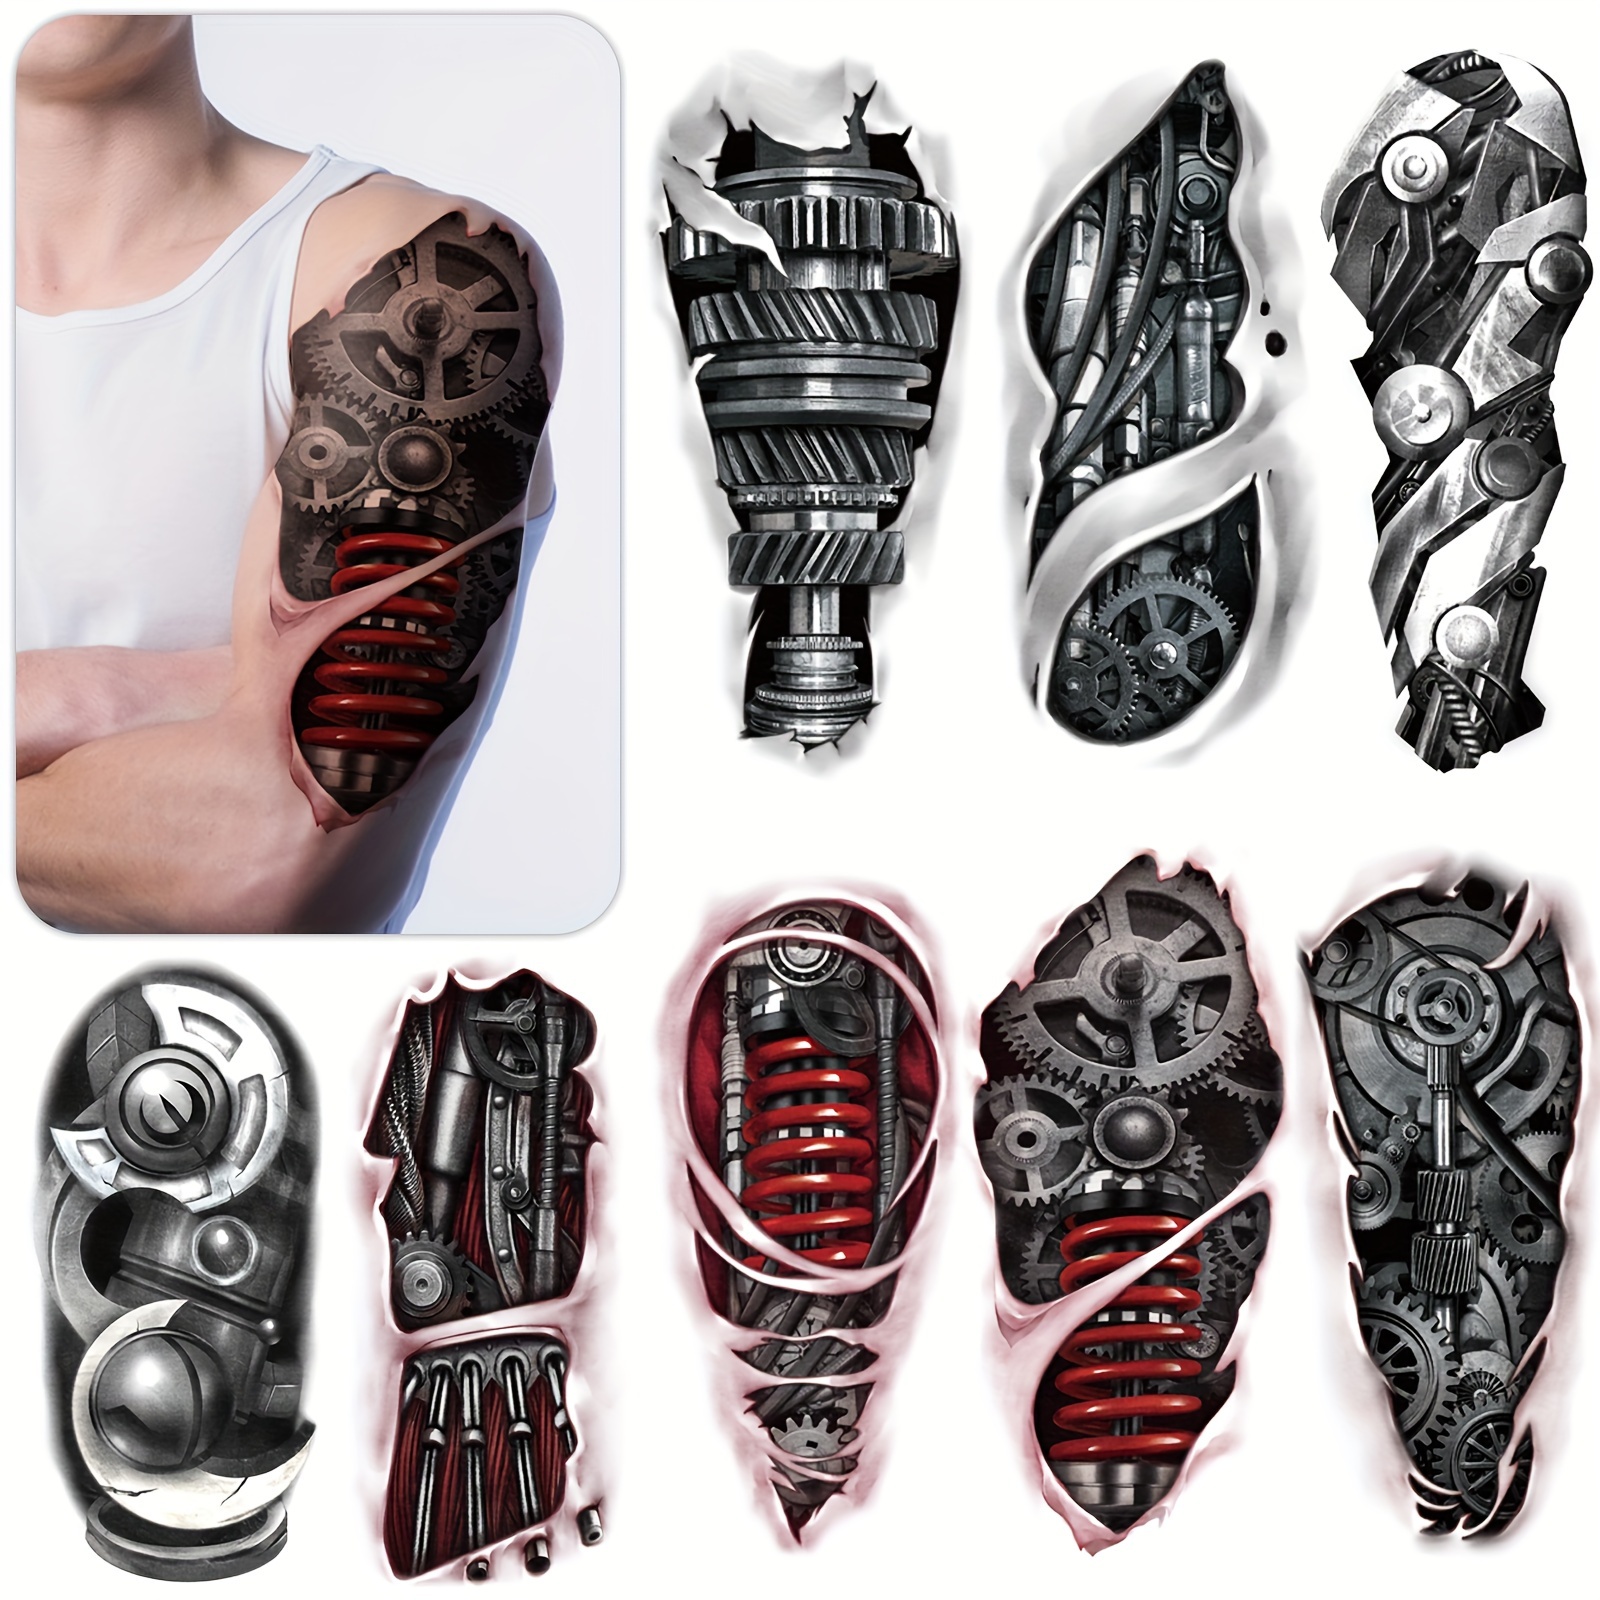 

17 Sheets Cool Machine 3d Realistic Fake Tattoos，wound Robot Makeup Temporary Tattoos For Men Women,waterproof&long-lasting